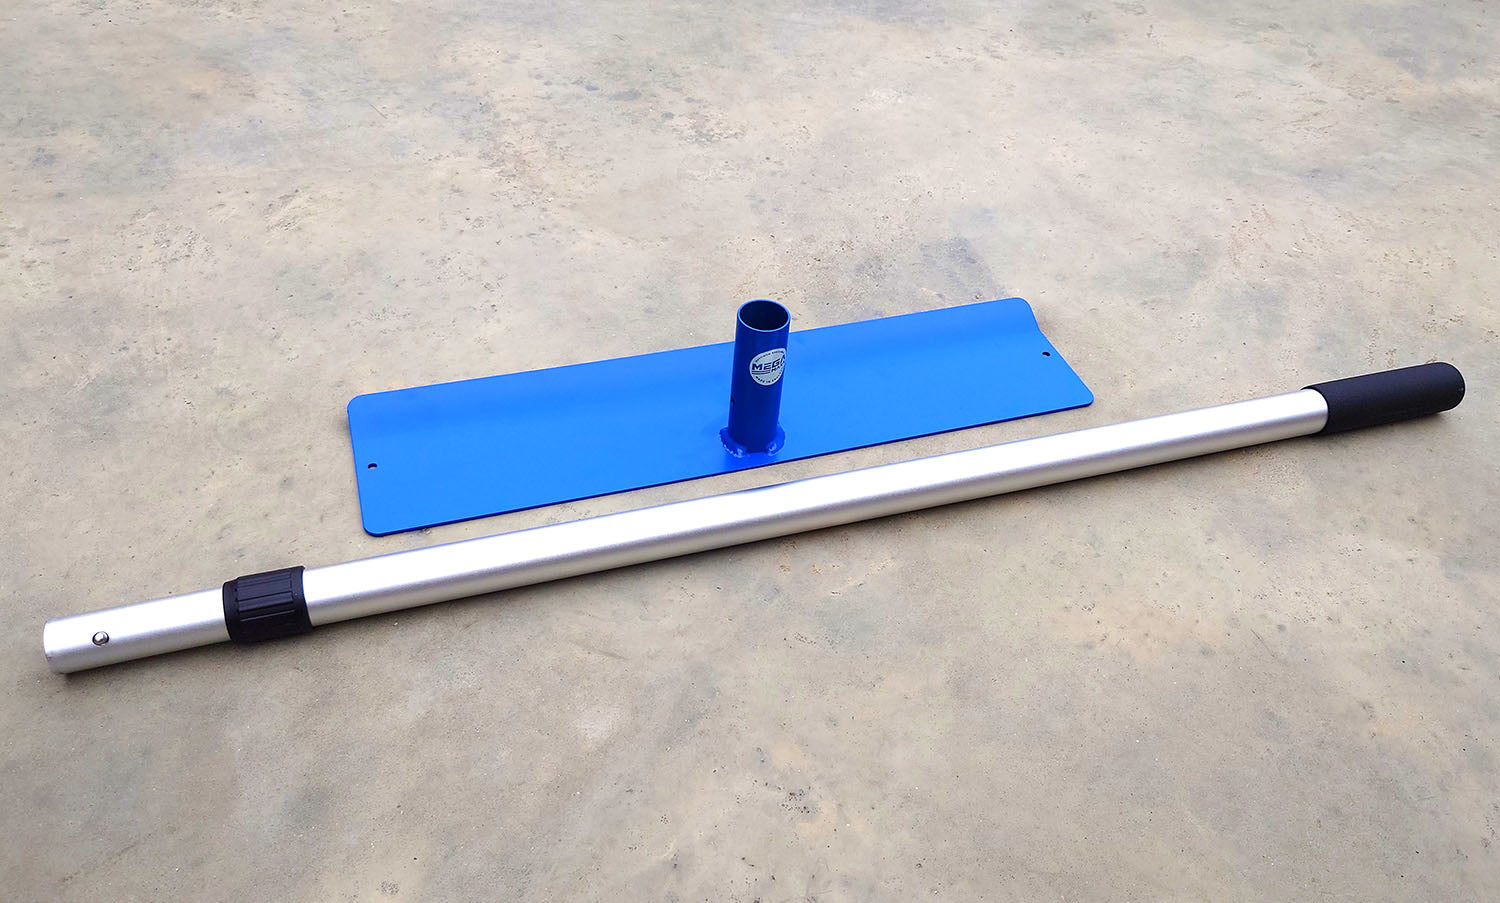 MegaMaxx UK™ Concrete Tamping & Spreading Placer Tool with Telescopic Handle